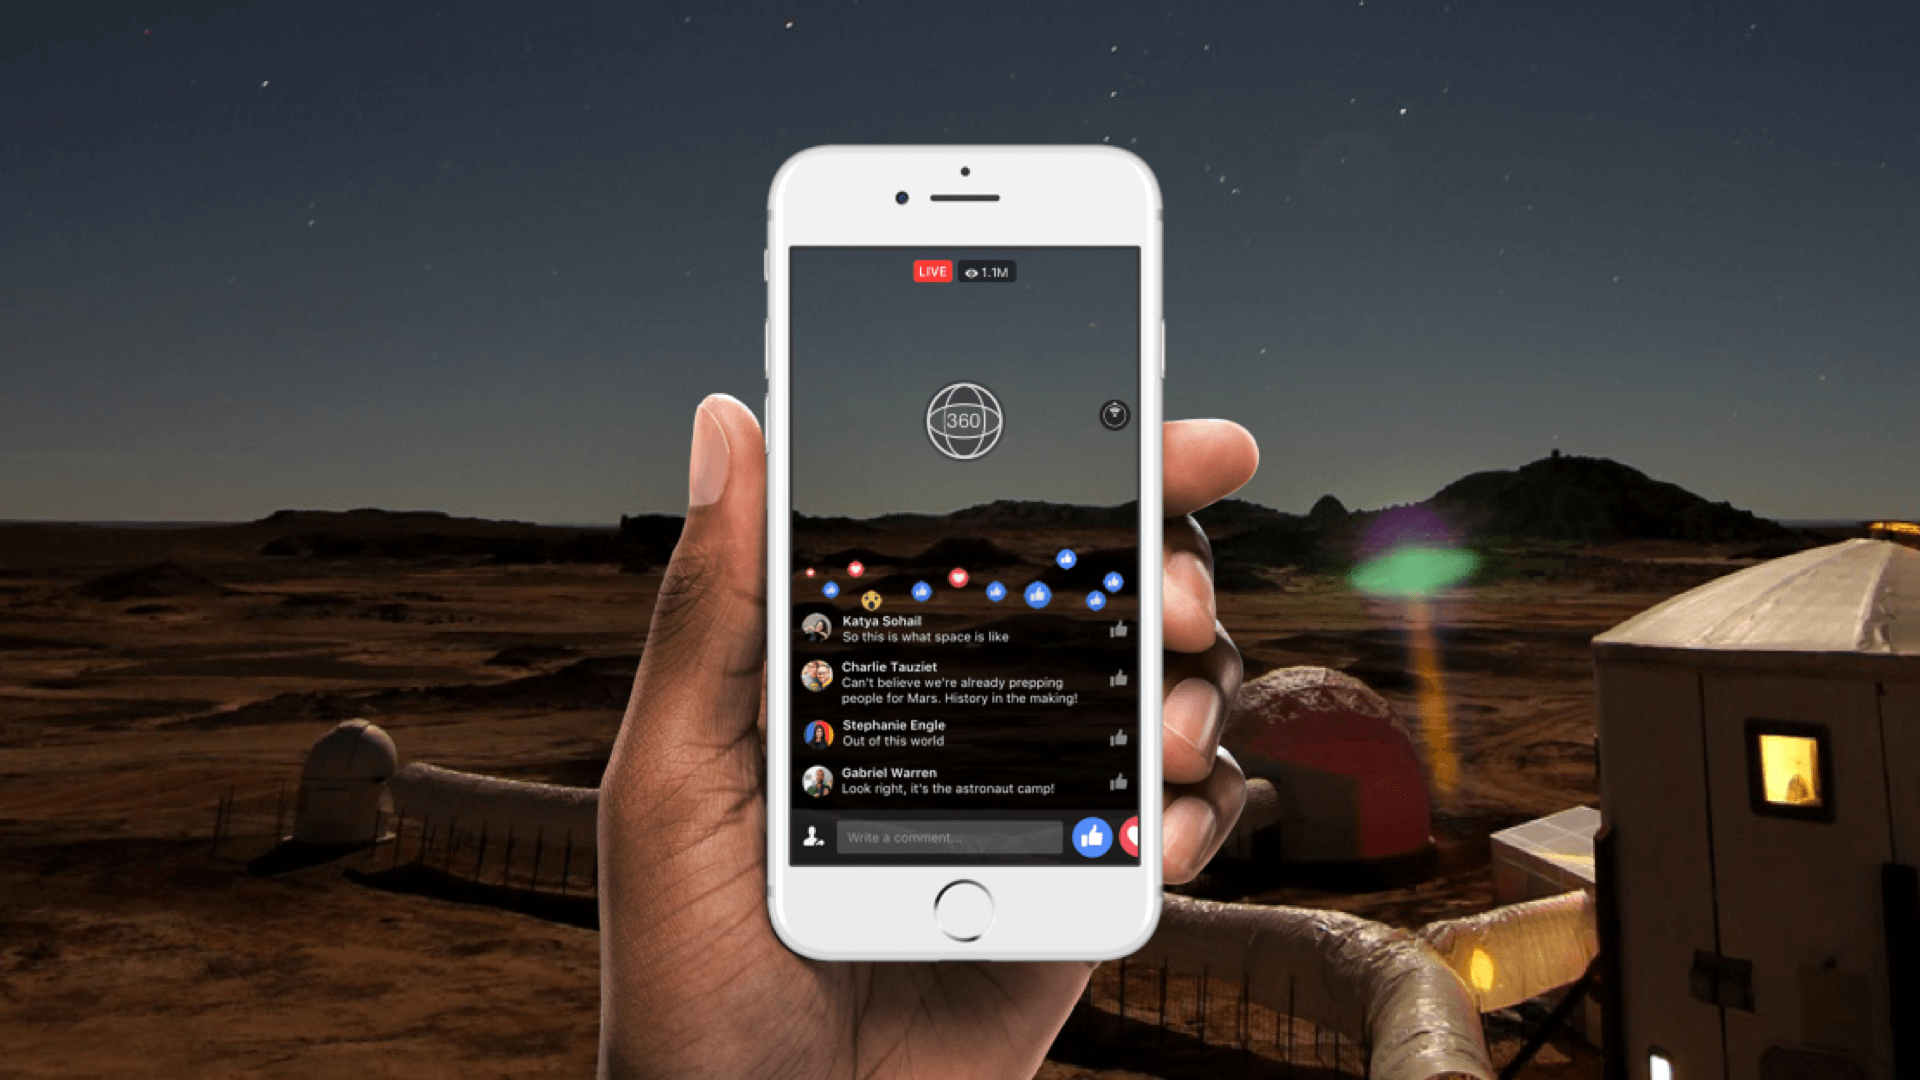 National Geographic will air the first 360-degree live stream on Facebook.